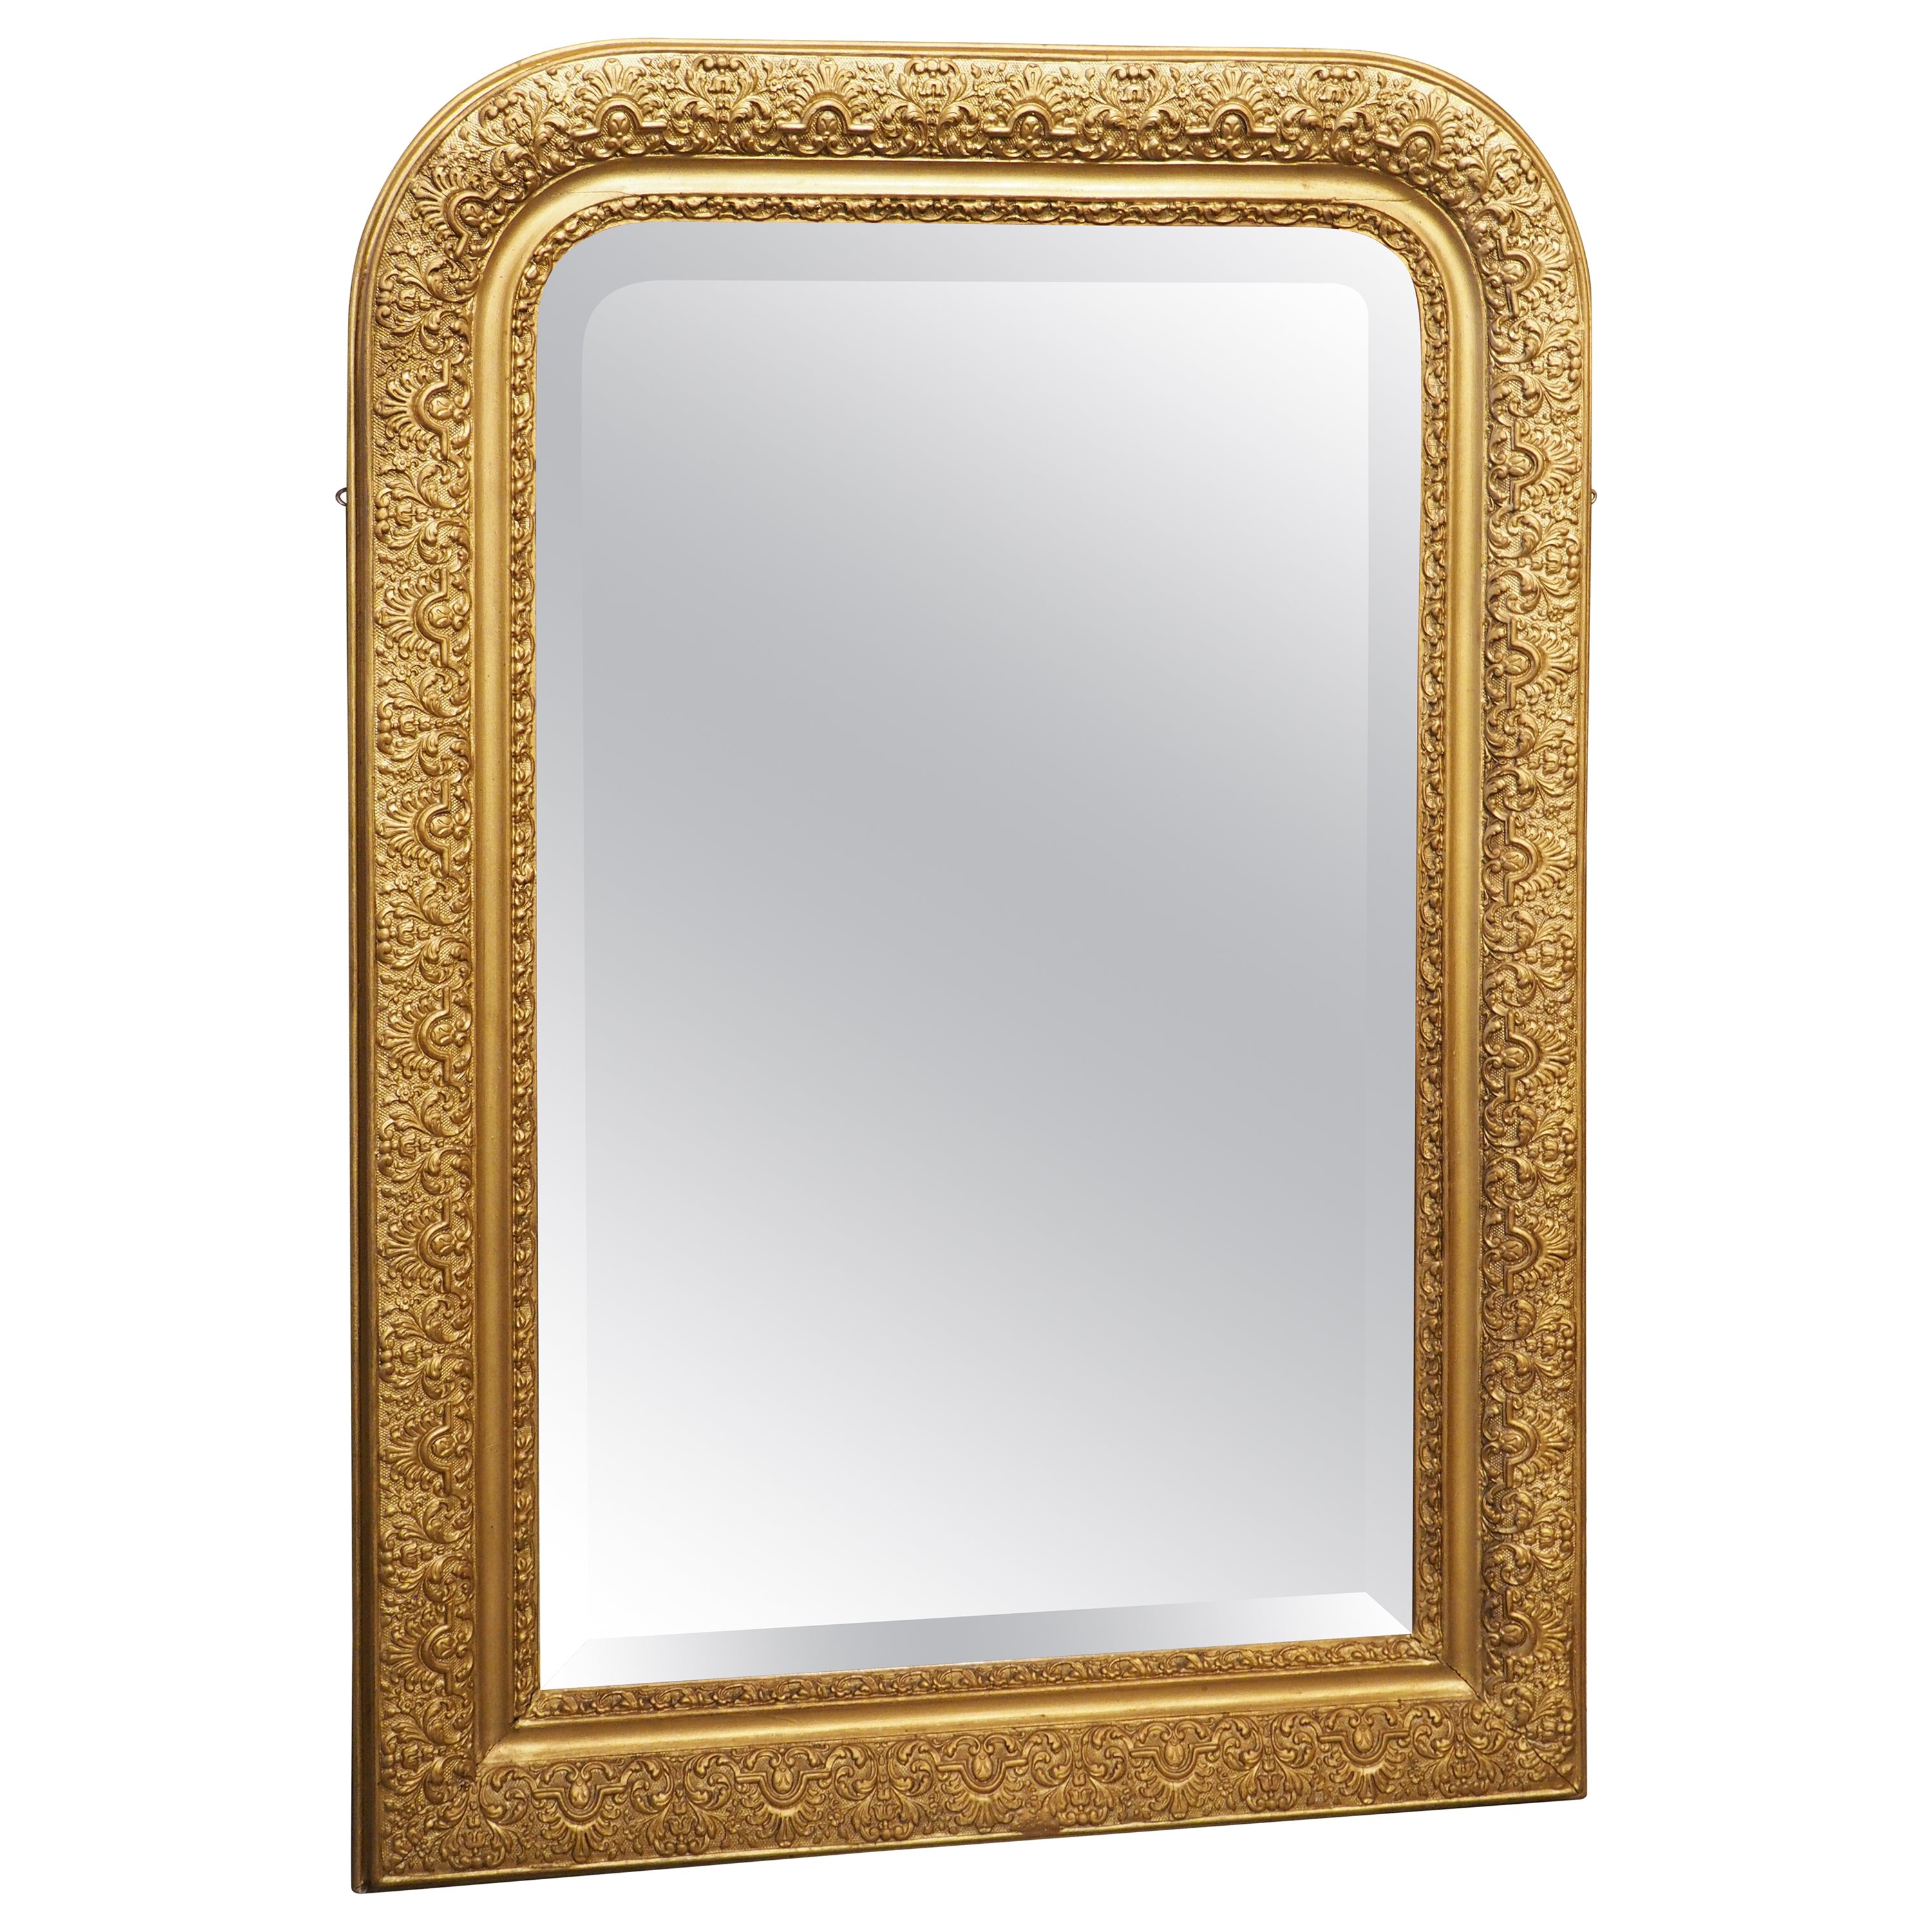 Gold Louis Philippe Style Beveled Mirror with Foliate and Floral Decor For Sale